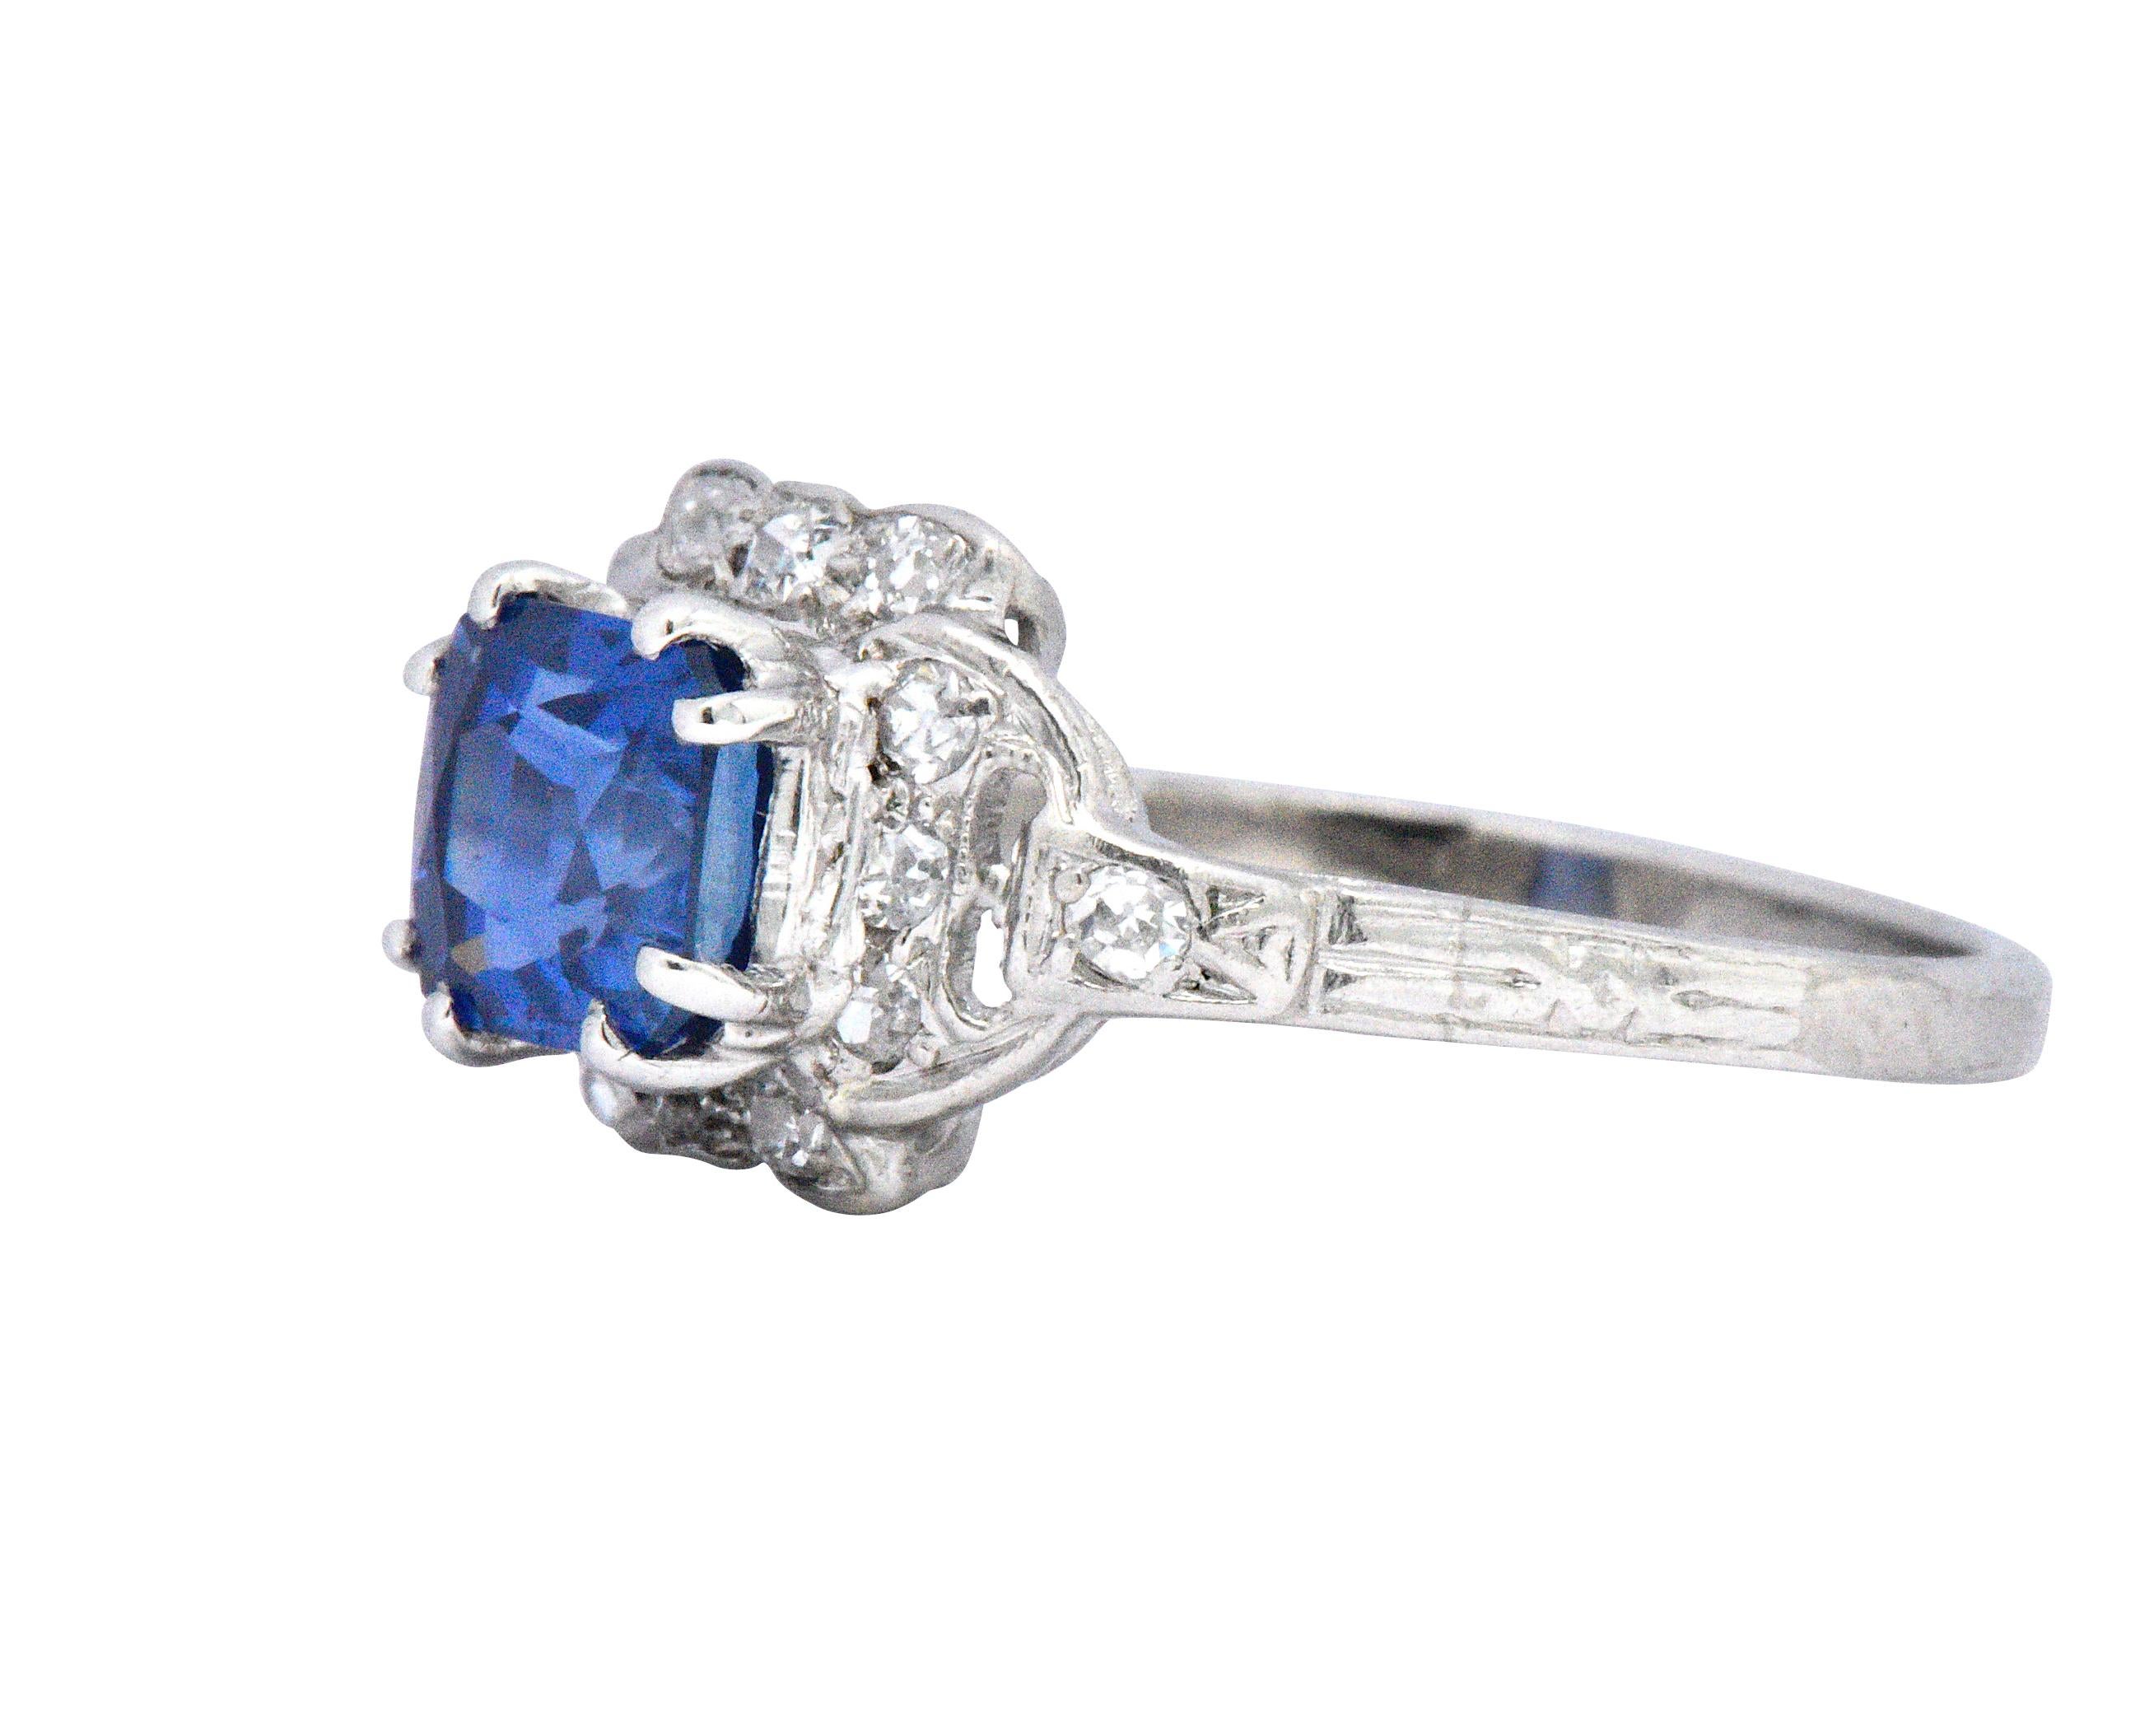 Centering a cushion cut sapphire weighing 1.47 carats

Single cut accent diamonds total carat weight 0.20, G/H color and VS to I clarity

Tested platinum mount 

Top measures 9.0 mm wide and sits 5.4 mm high

Ring Size: 5 1/4 & Sizable 

Total